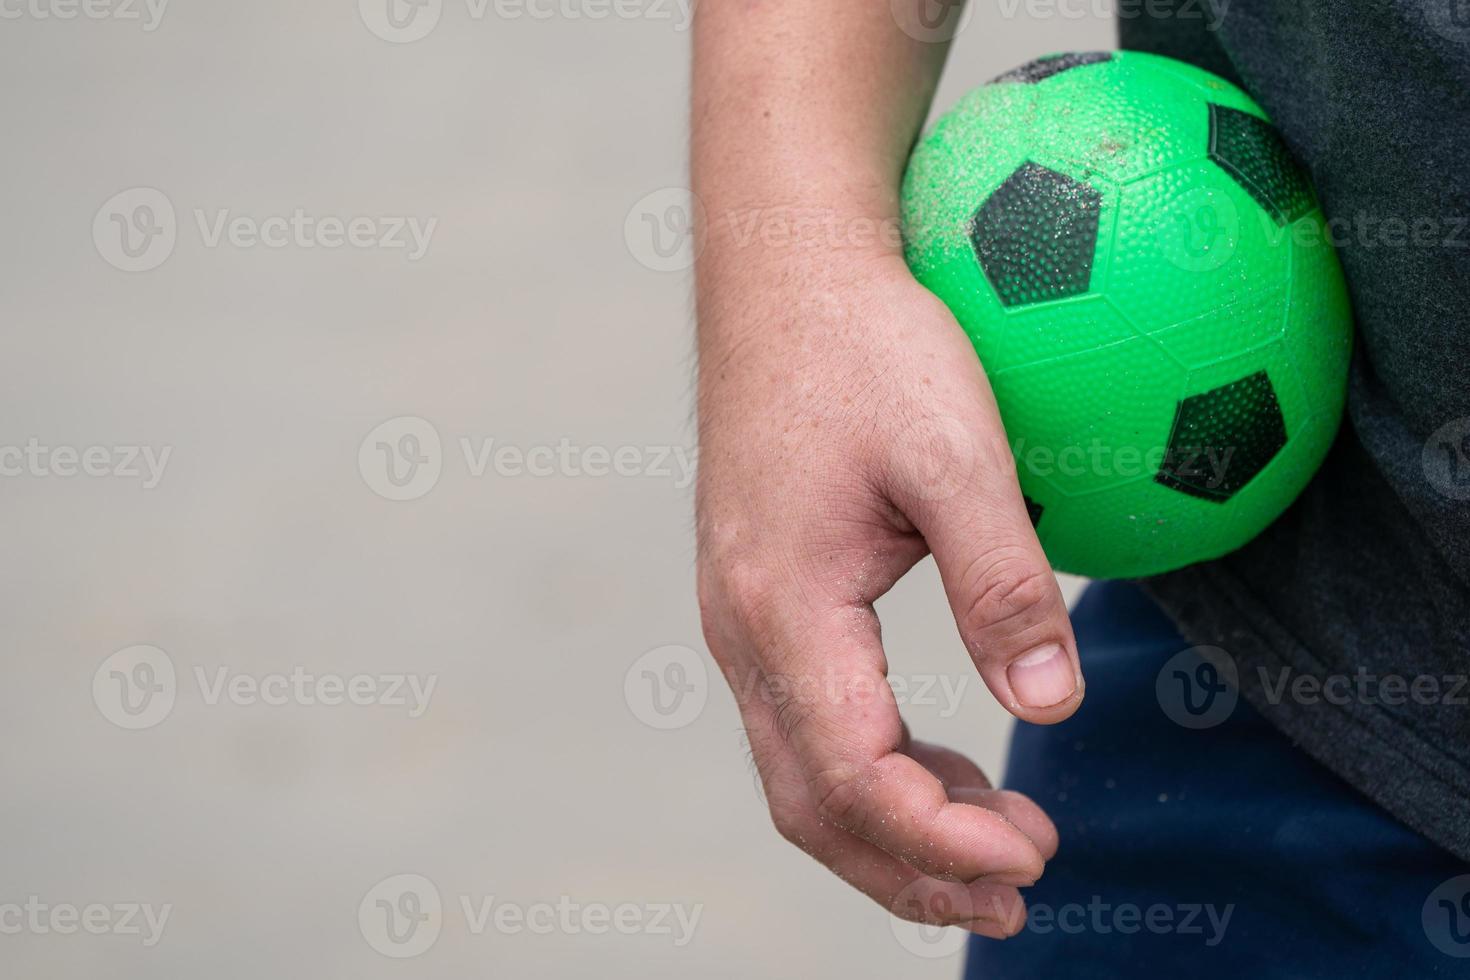 The Green Rubber football toy was held in the male's hand photo